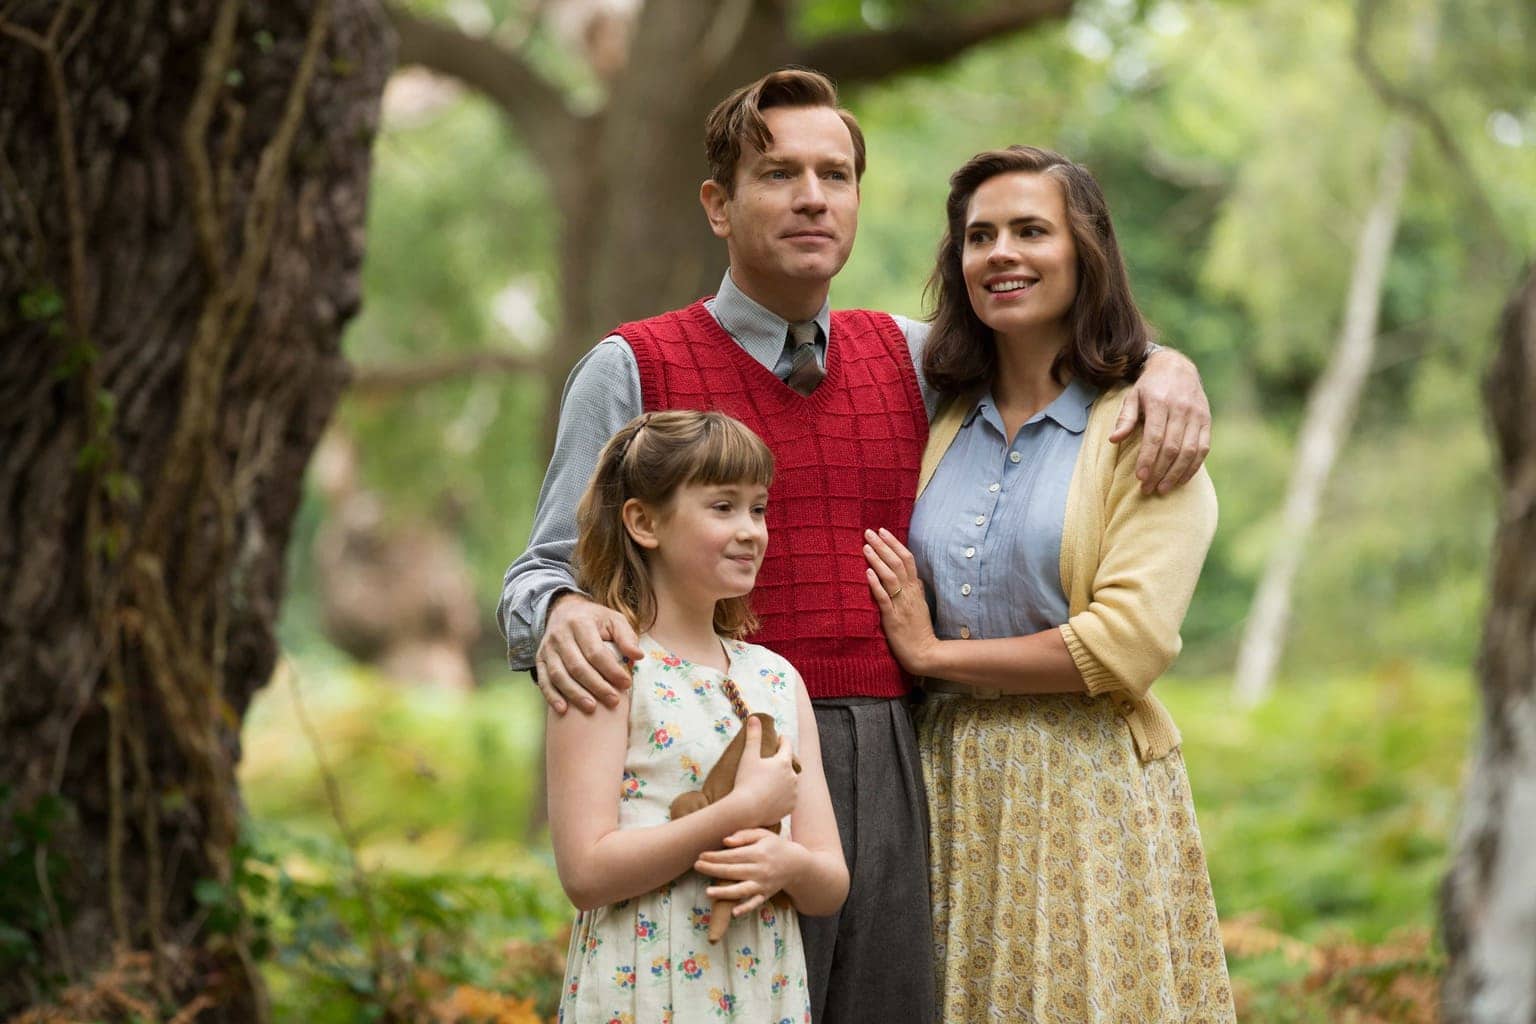 Review of Disney's Christopher Robin Movie: Winnie the Pooh has once again made his way back in our hearts with the release of the new heartwarming film.